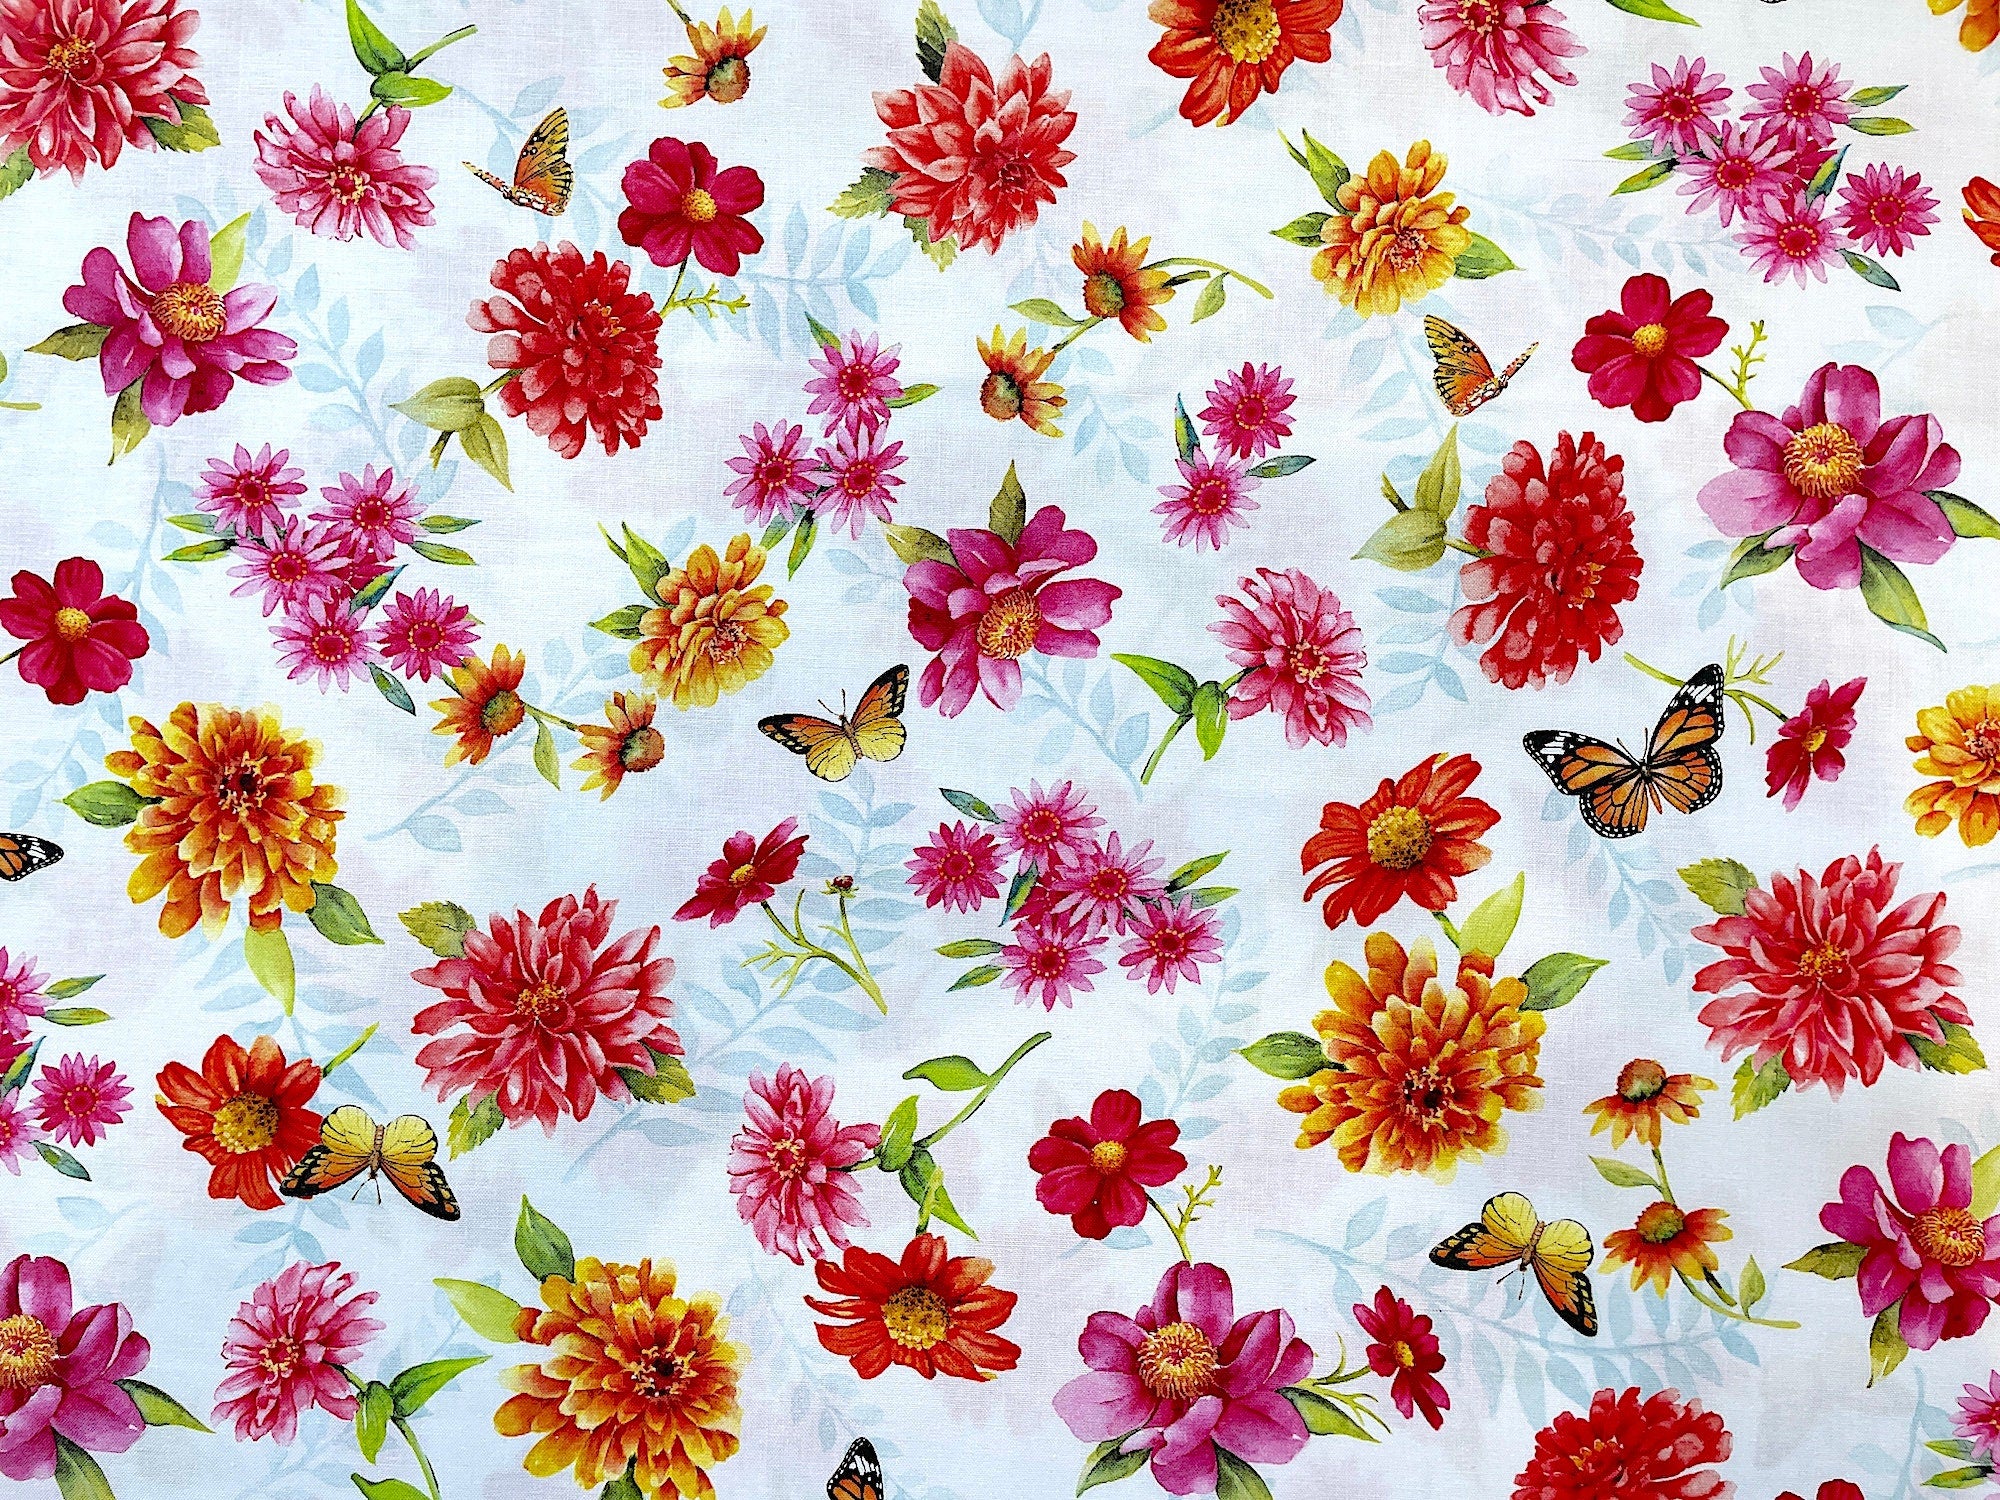 This fabric is called Chinoiserie Garden and it's covered with butterflies and red, pink and yellow flowers and light green leaves